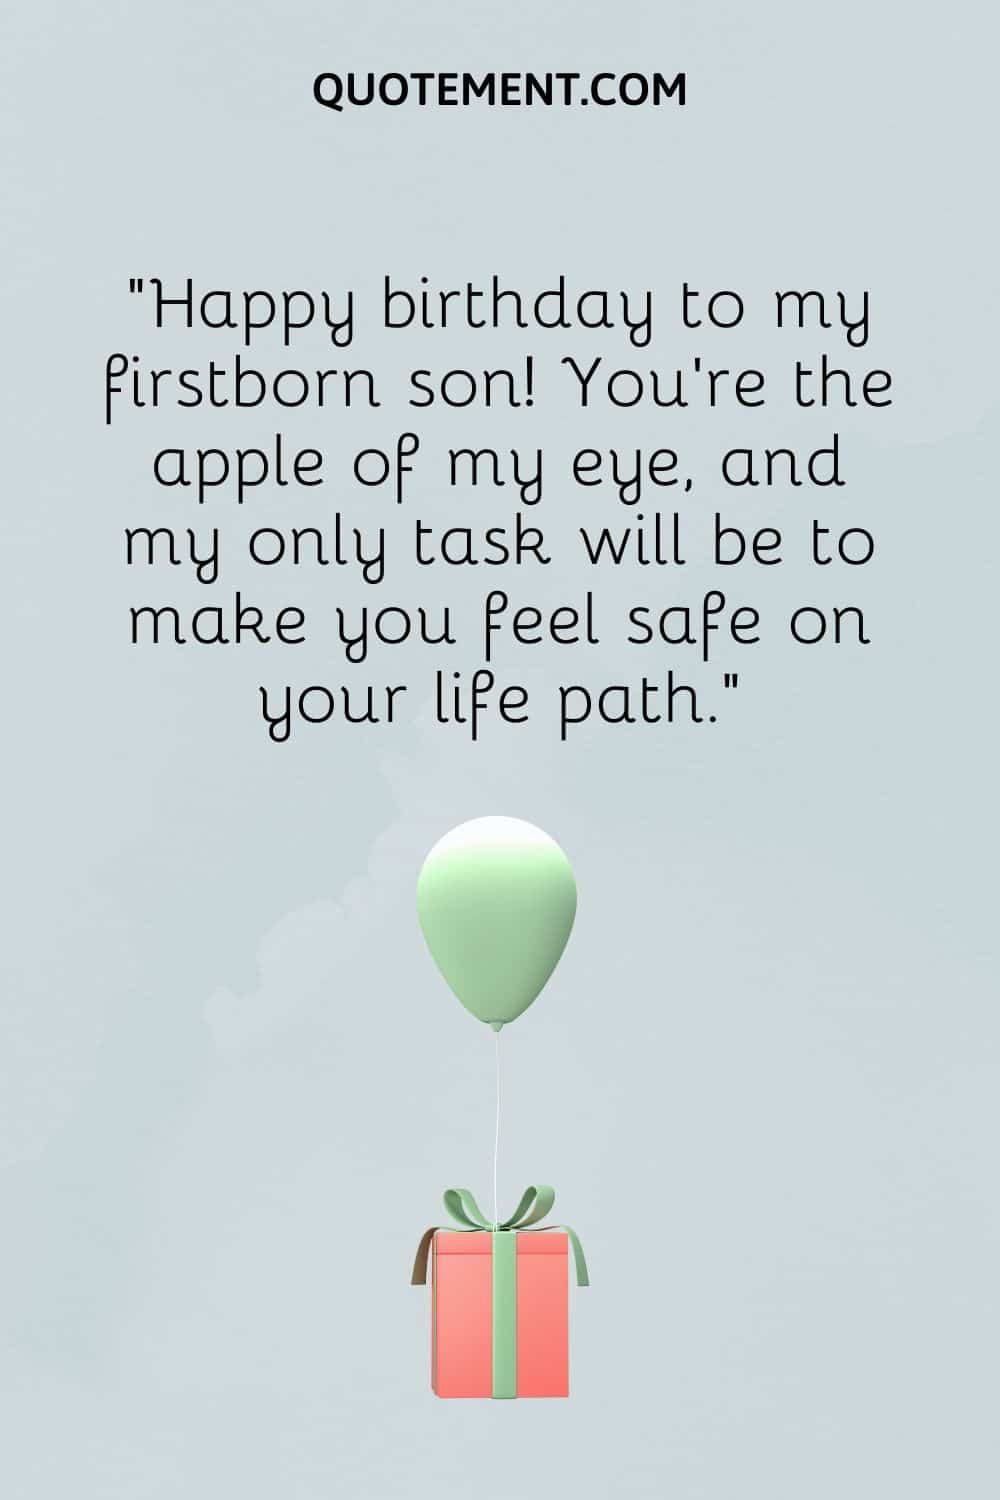 You’re the apple of my eye, and my only task will be to make you feel safe on your life path